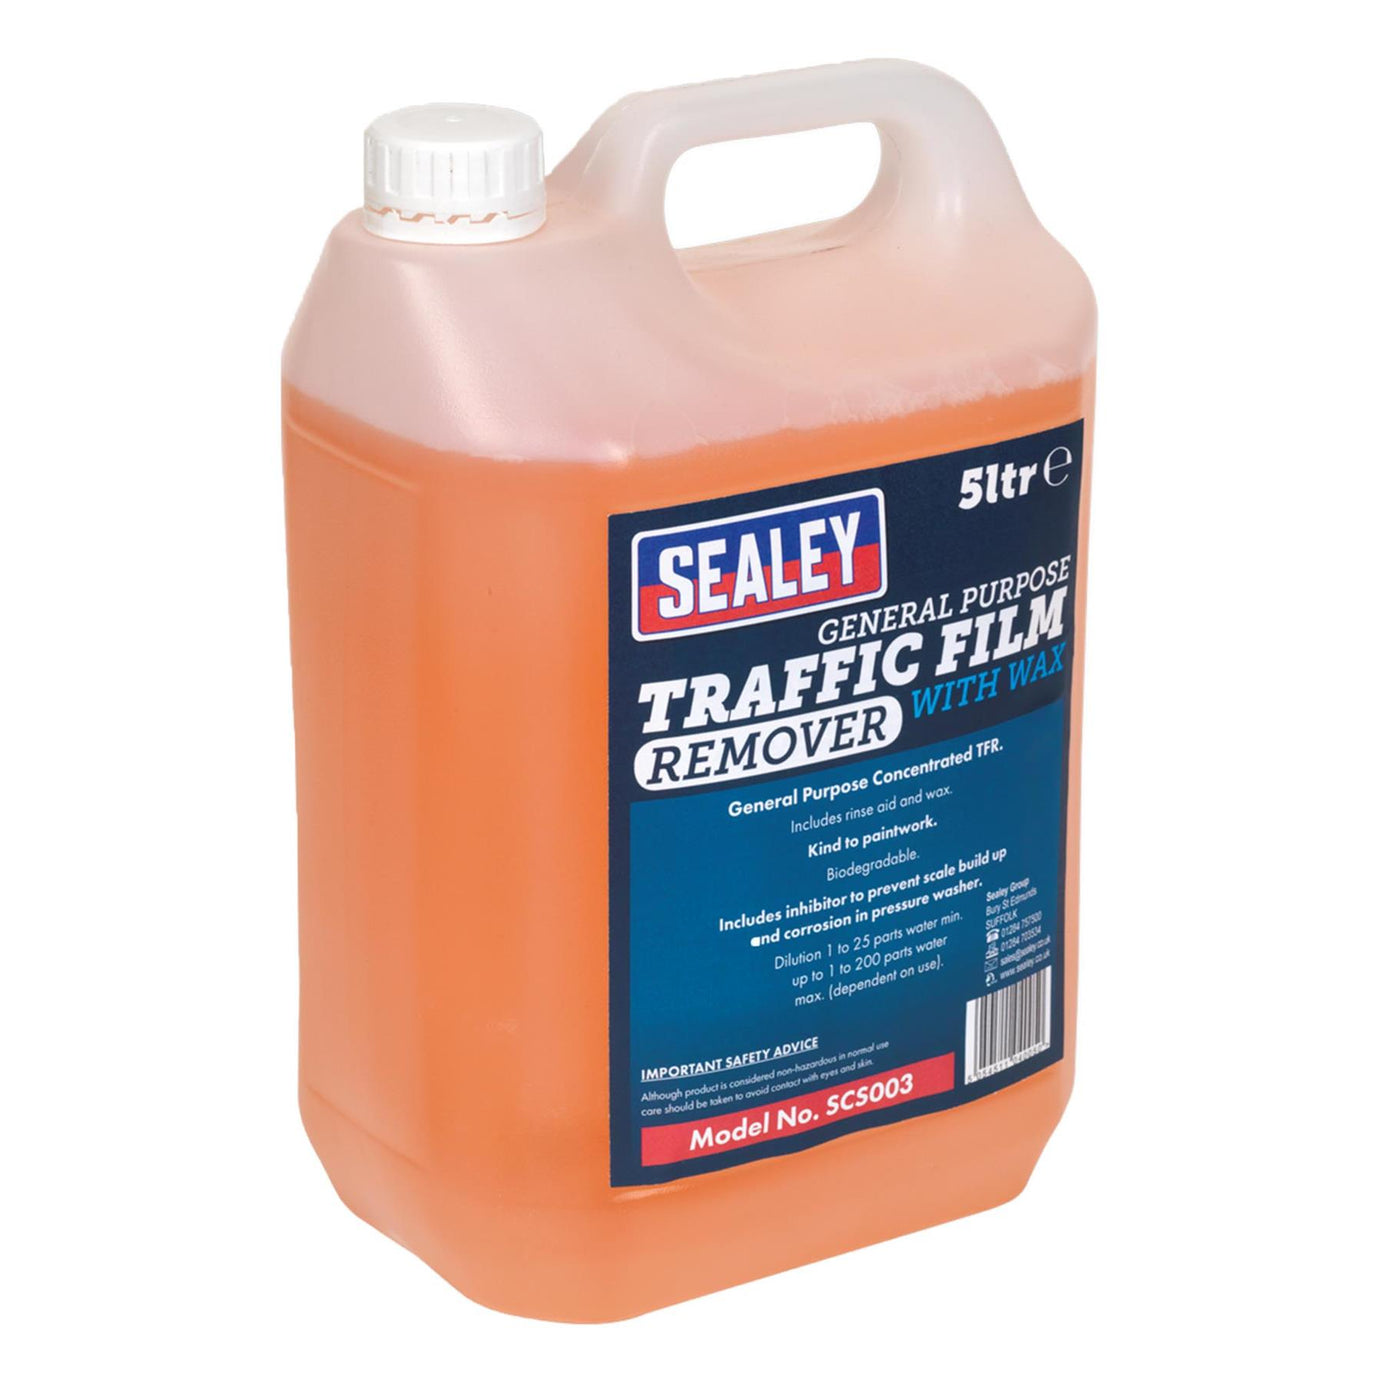 Sealey TFR Detergent with Wax Concentrated 5L